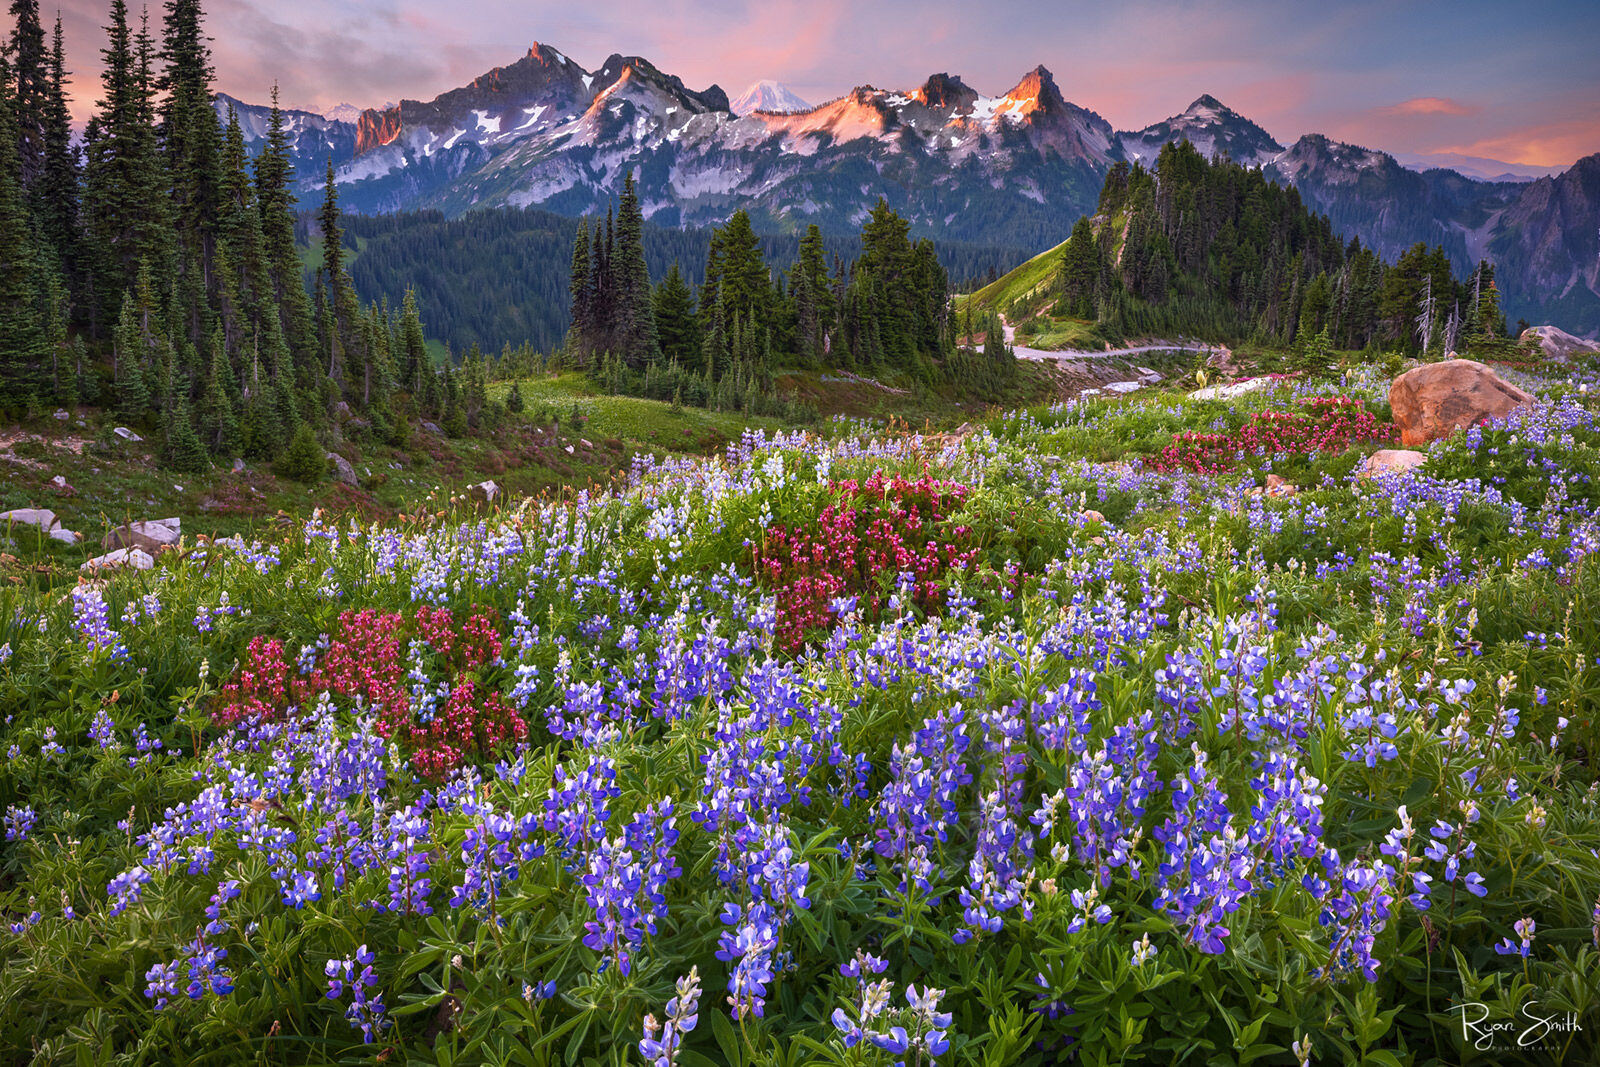 A mountain skyline under pink clouds at sunset, a meadow of spruce trees, purple and red wildflowers in a meadow near Mount Rainier National Park